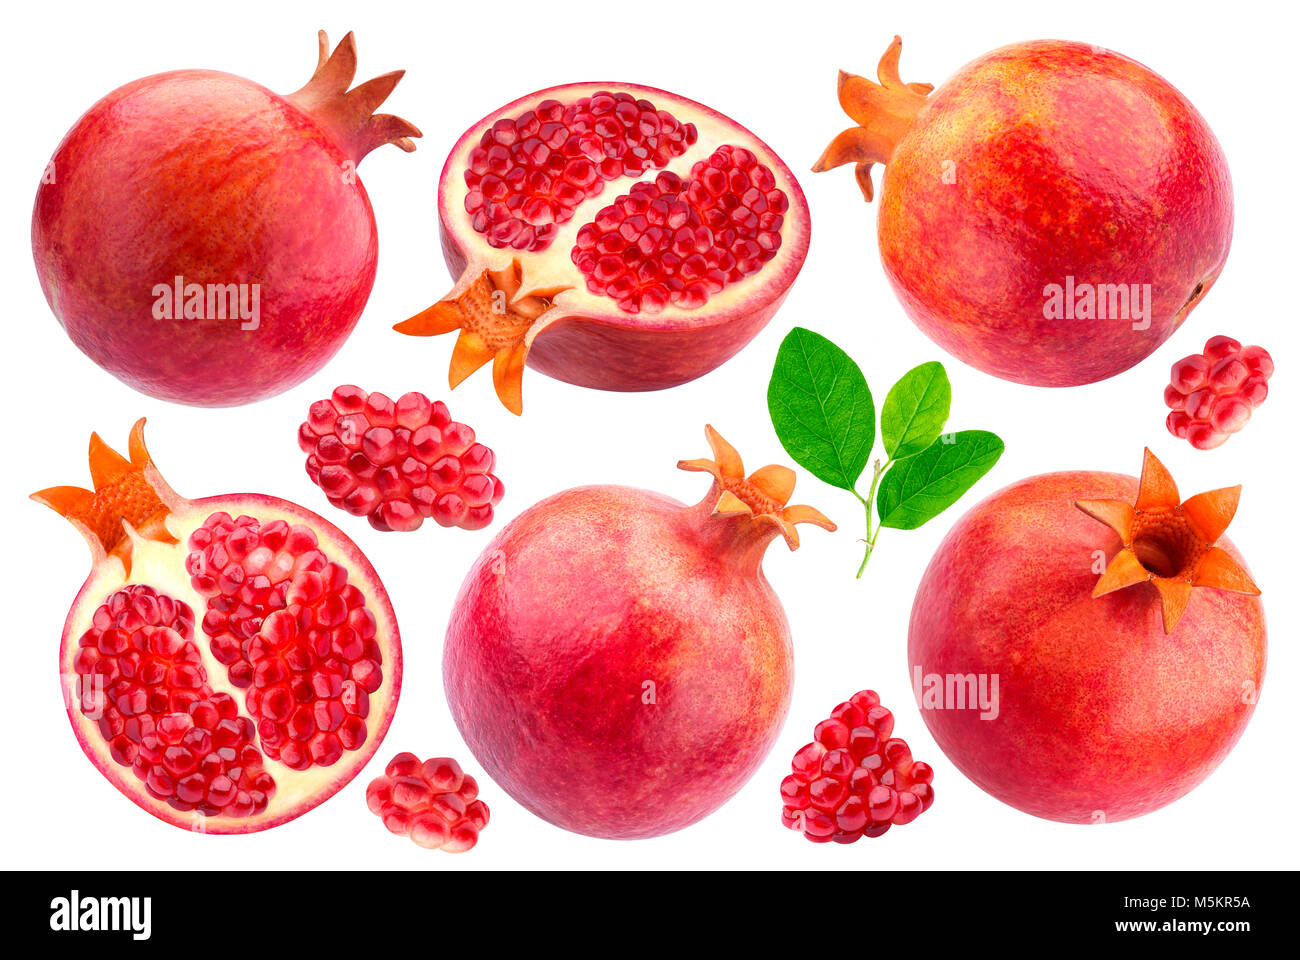 Pomegranate isolated on white background, collection Stock Photo